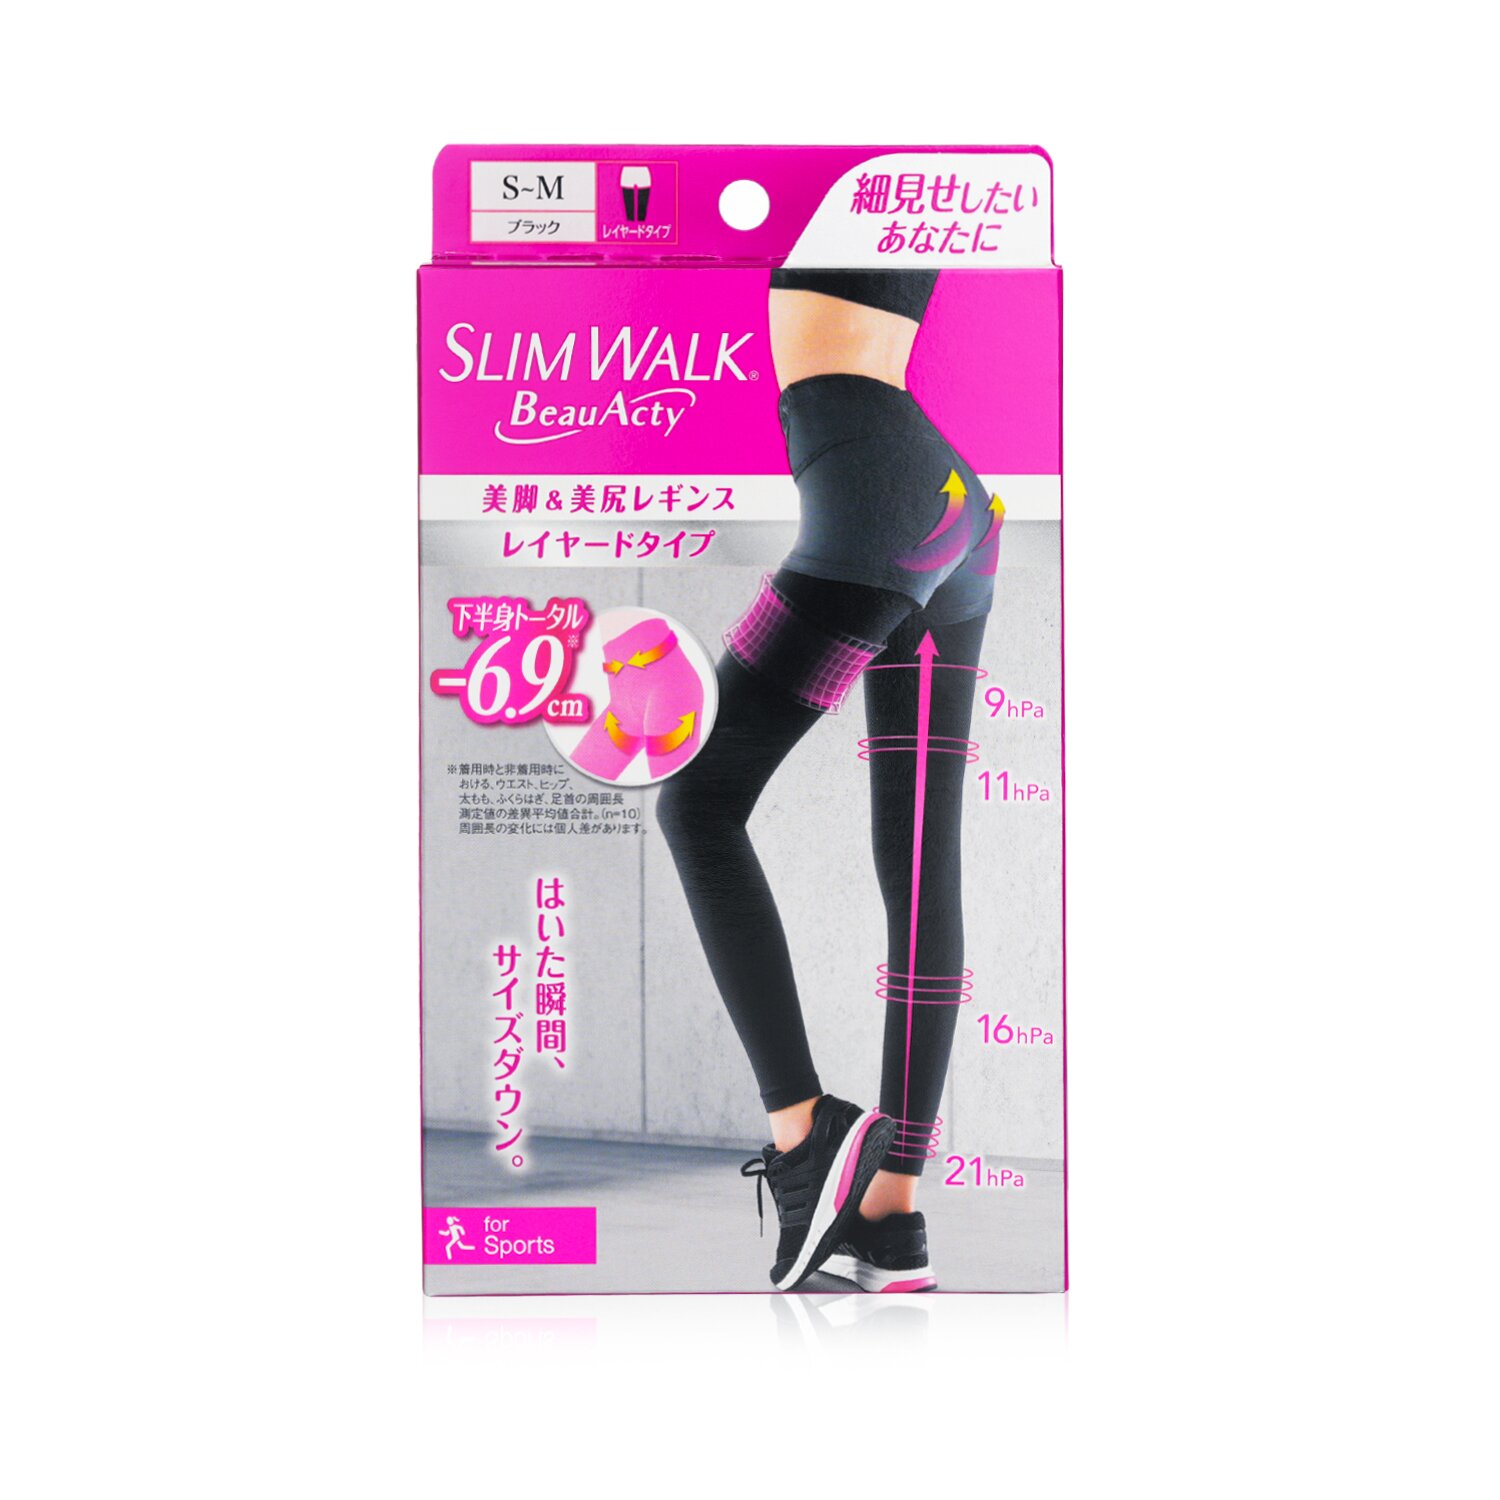 SlimWalk Compression Leggings for Sports (Sweat-Absorbent, Quick-Drying) 1pair